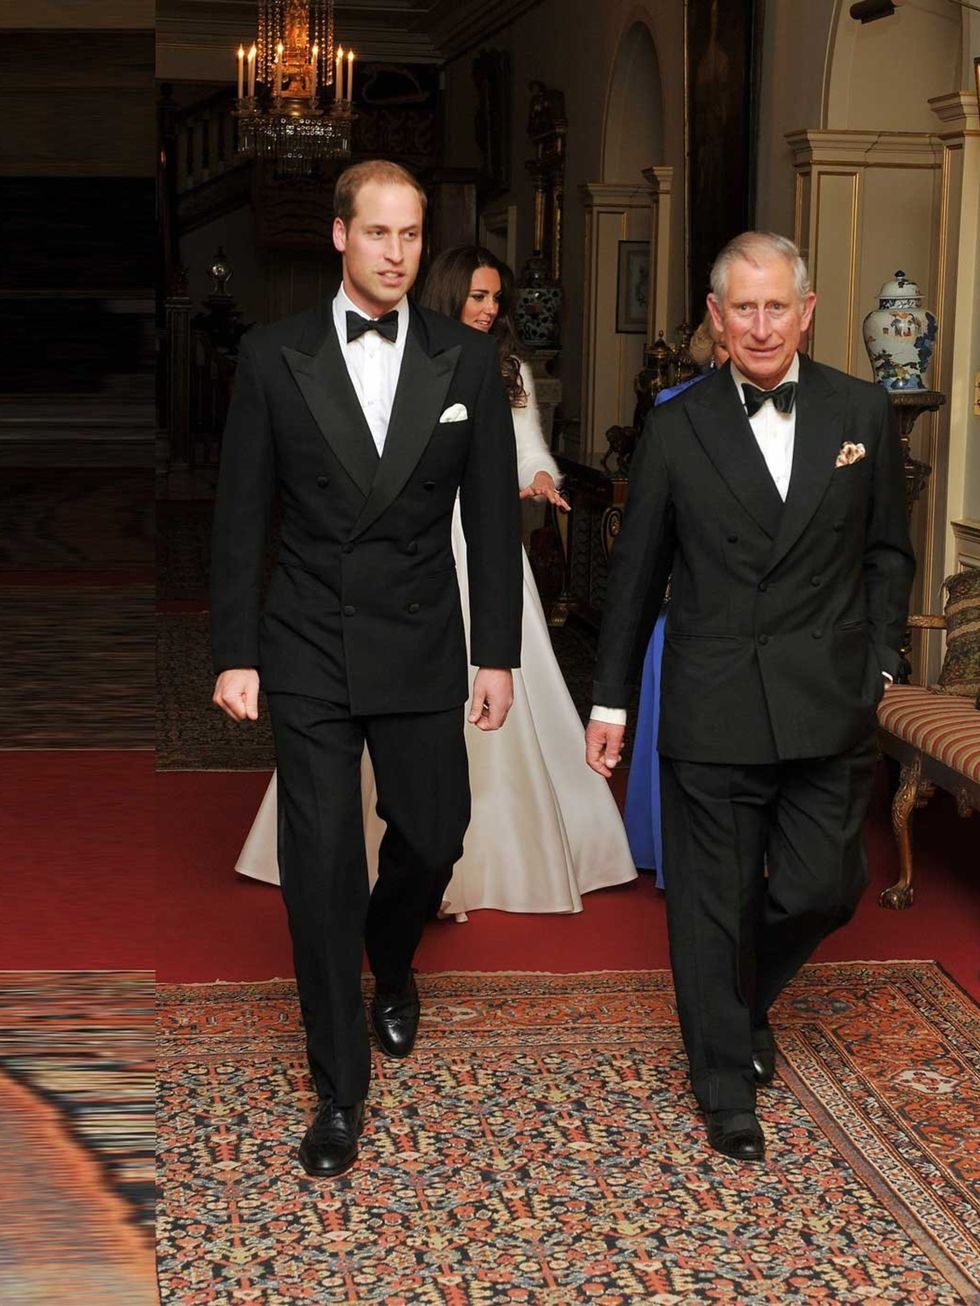 <p>The new royal baby is fourth in line to the British throne, behind her grandfather Charles, father, <a href="http://www.elleuk.com/star-style/celebrity-style-files/prince-william-elle-man-of-the-week">William</a>, and brother George. Her birth has push